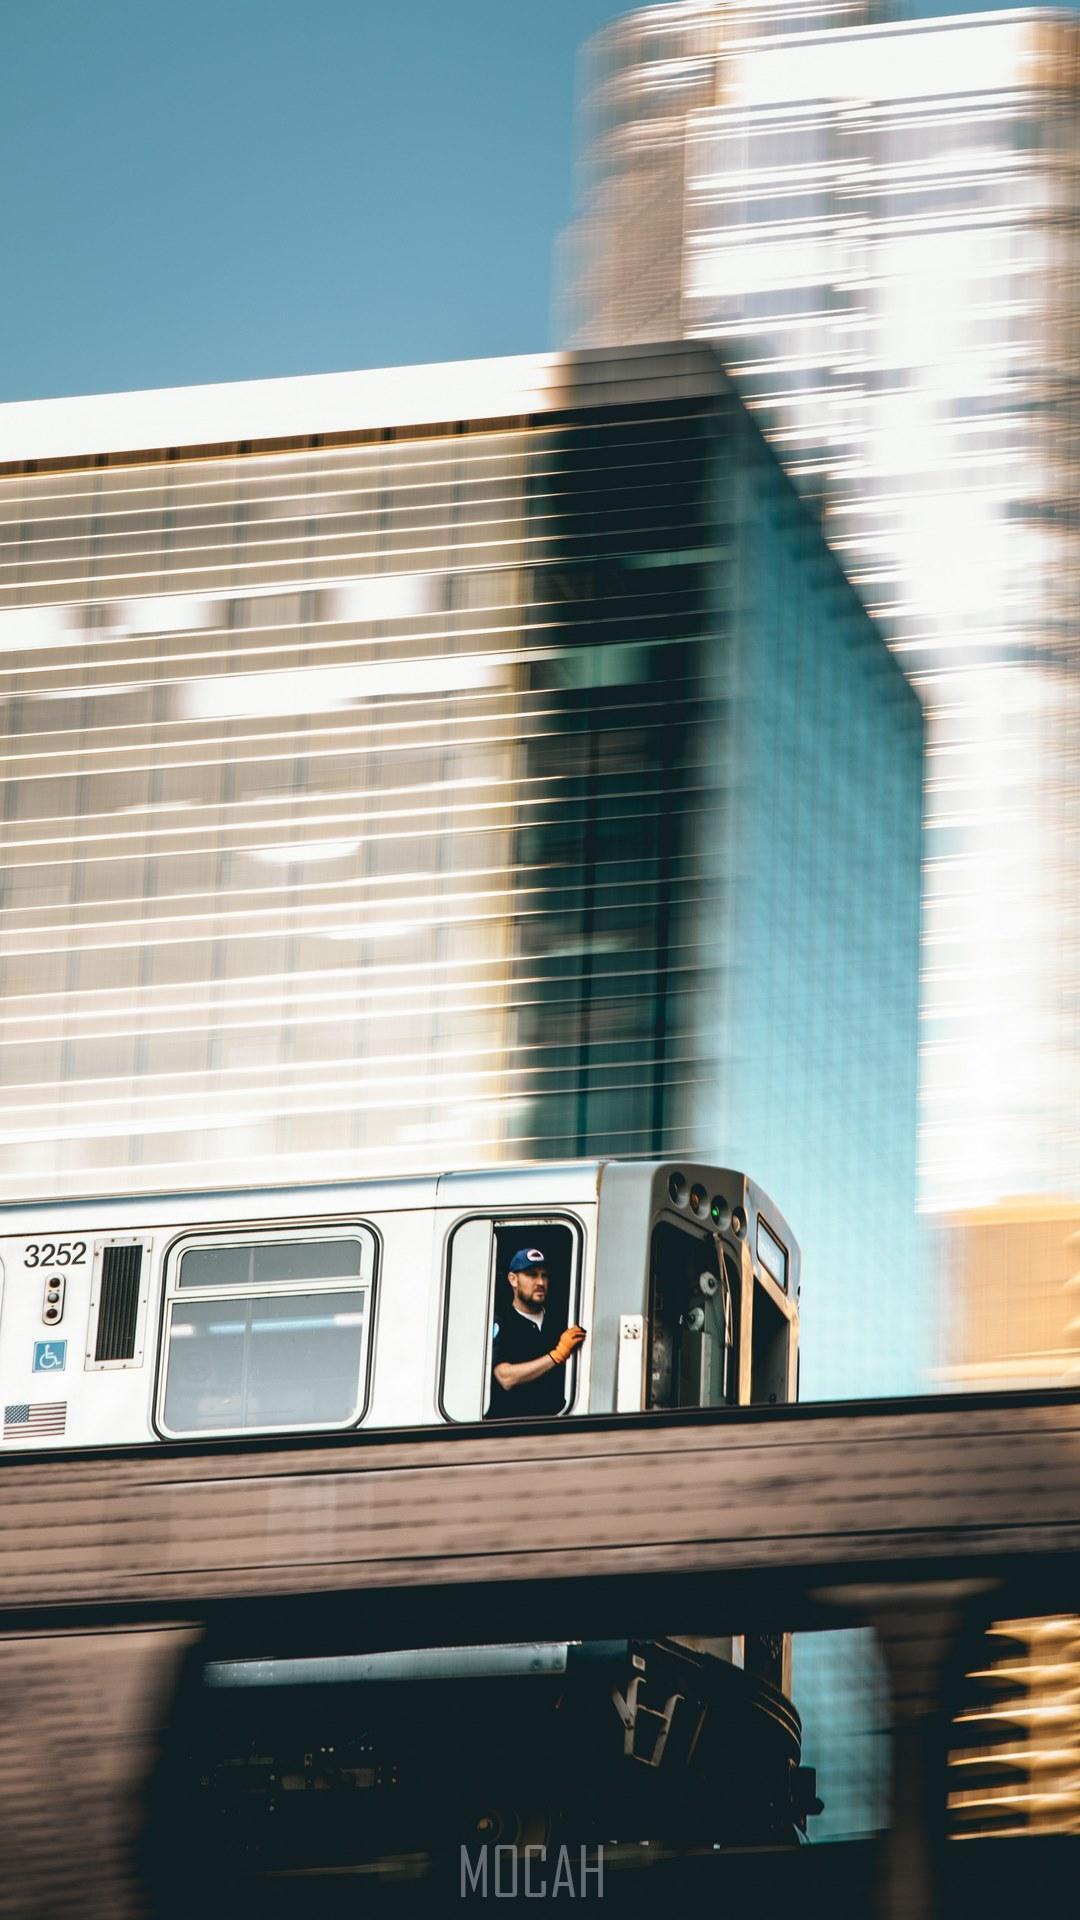 HD wallpaper, A Man Looking Out Of A Moving Urban Trail In Chicago, 1080X1920, Man In A Moving Urban Train, Htc One X10 Full Hd Wallpaper